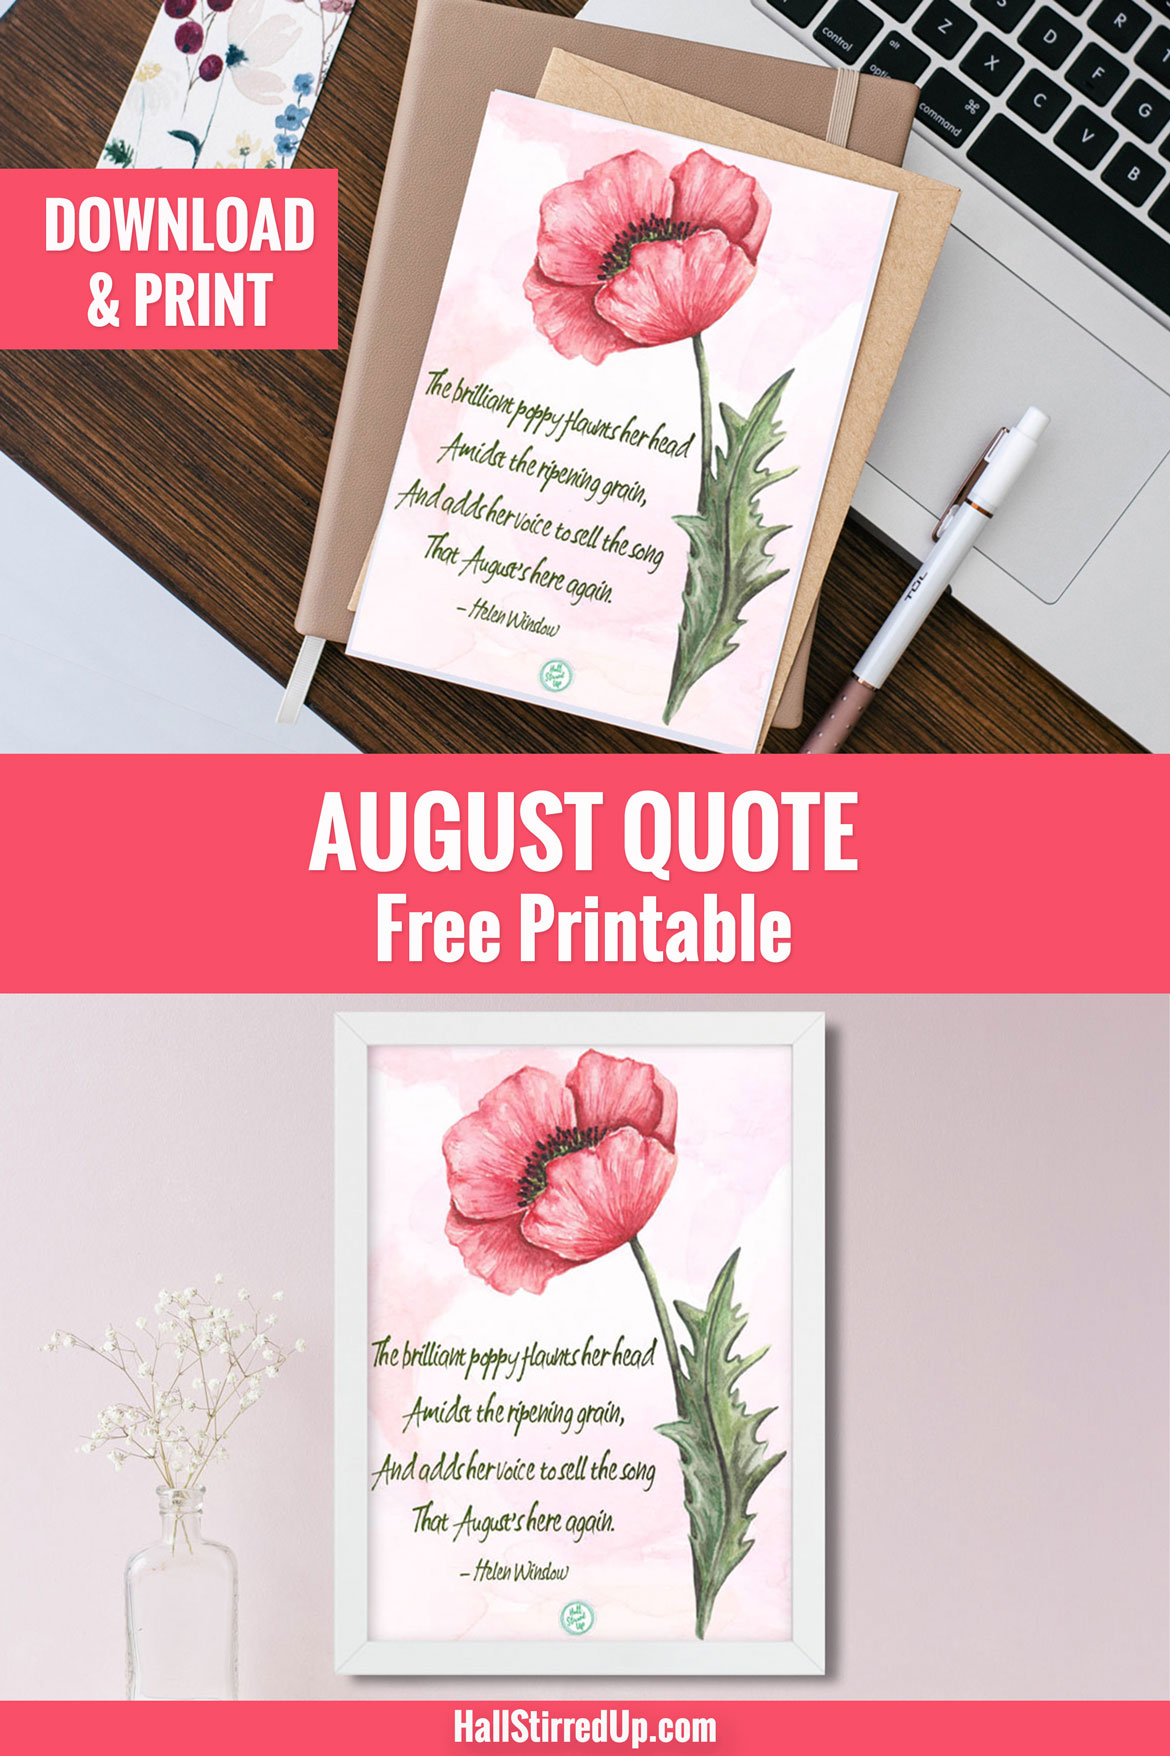 It's time for a new August quote printable